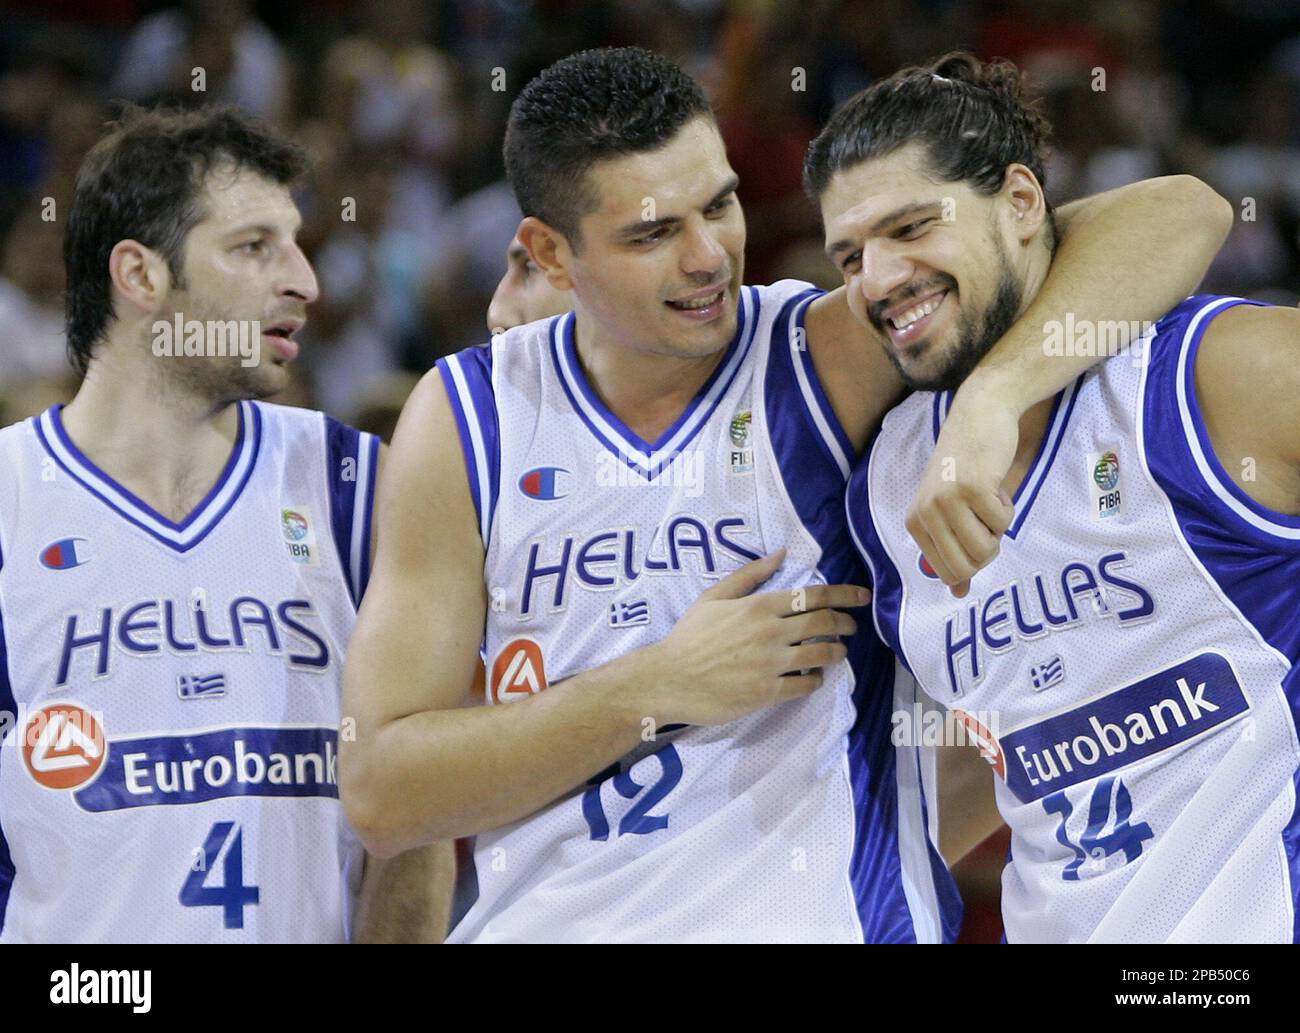 From left to right: Greek national basketball team players Theodoros  Papaloukas, Konstantinos Tsartsaris, Lazaros Papadopoulos celebrate their  victory against Croatia during their qualifying round Group E match of the  EuroBasket Championship in